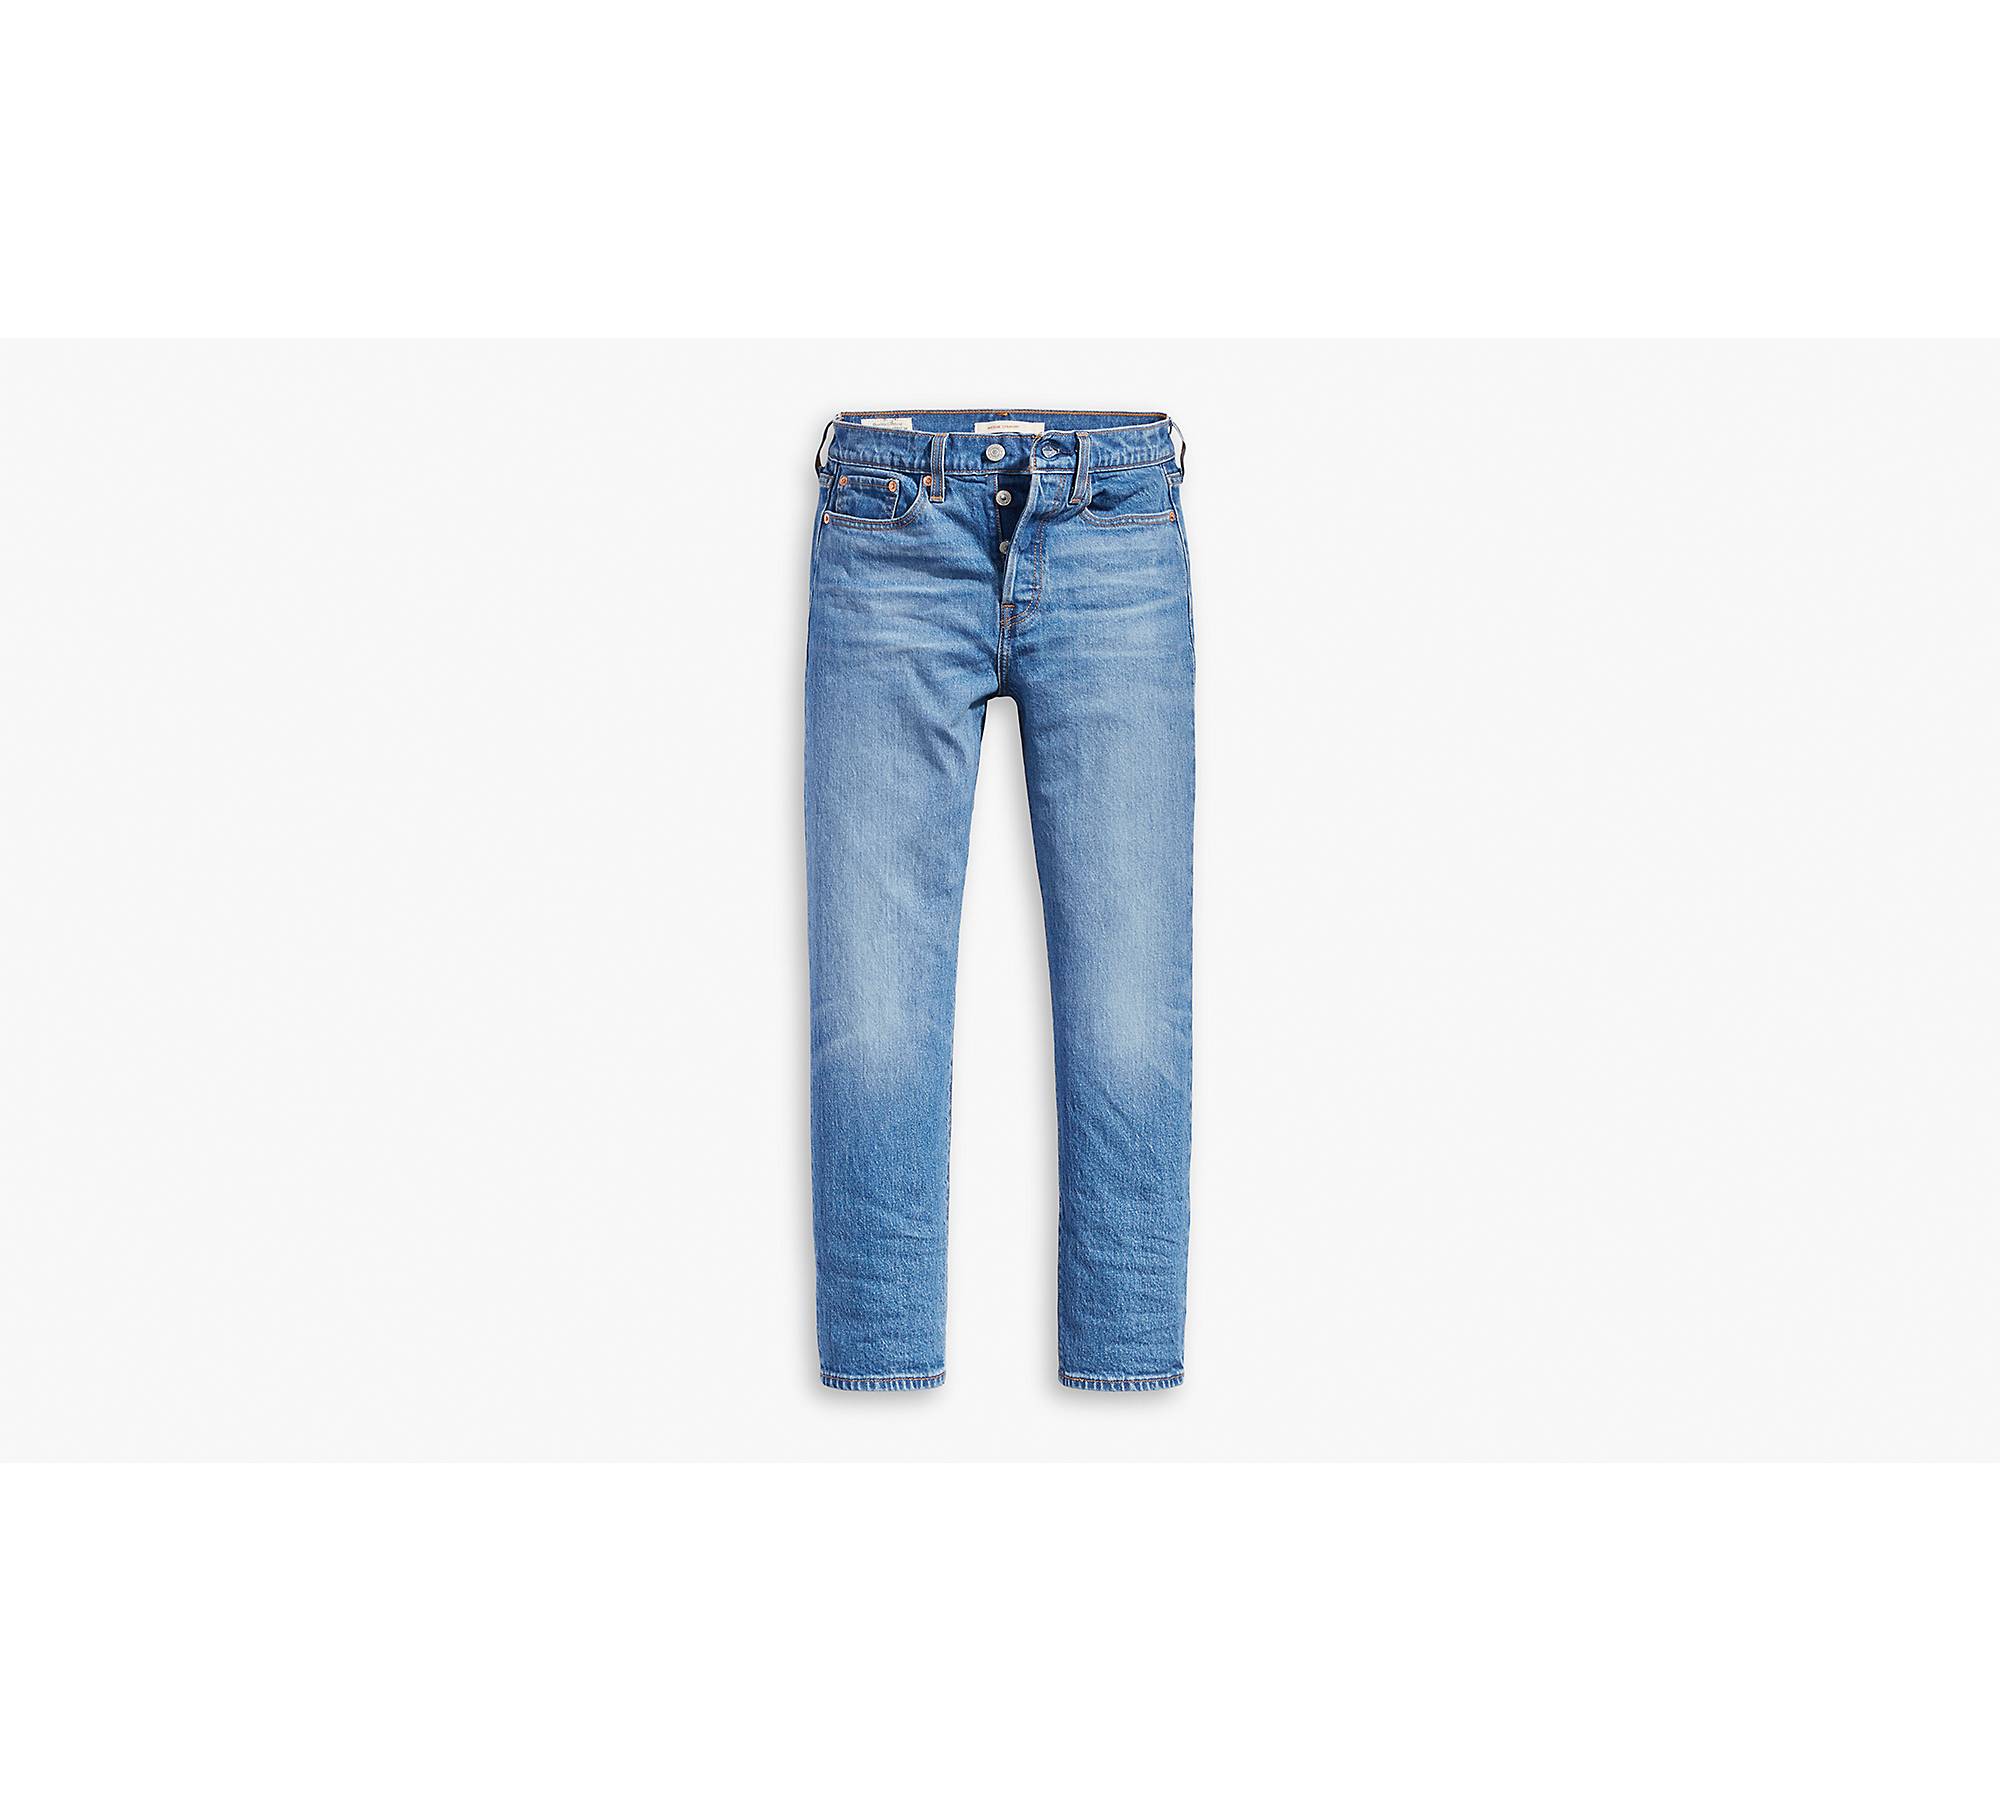 LEVI'S Womens High Waist Tapered Jeans W25 L26 Blue Cotton, Vintage &  Second-Hand Clothing Online